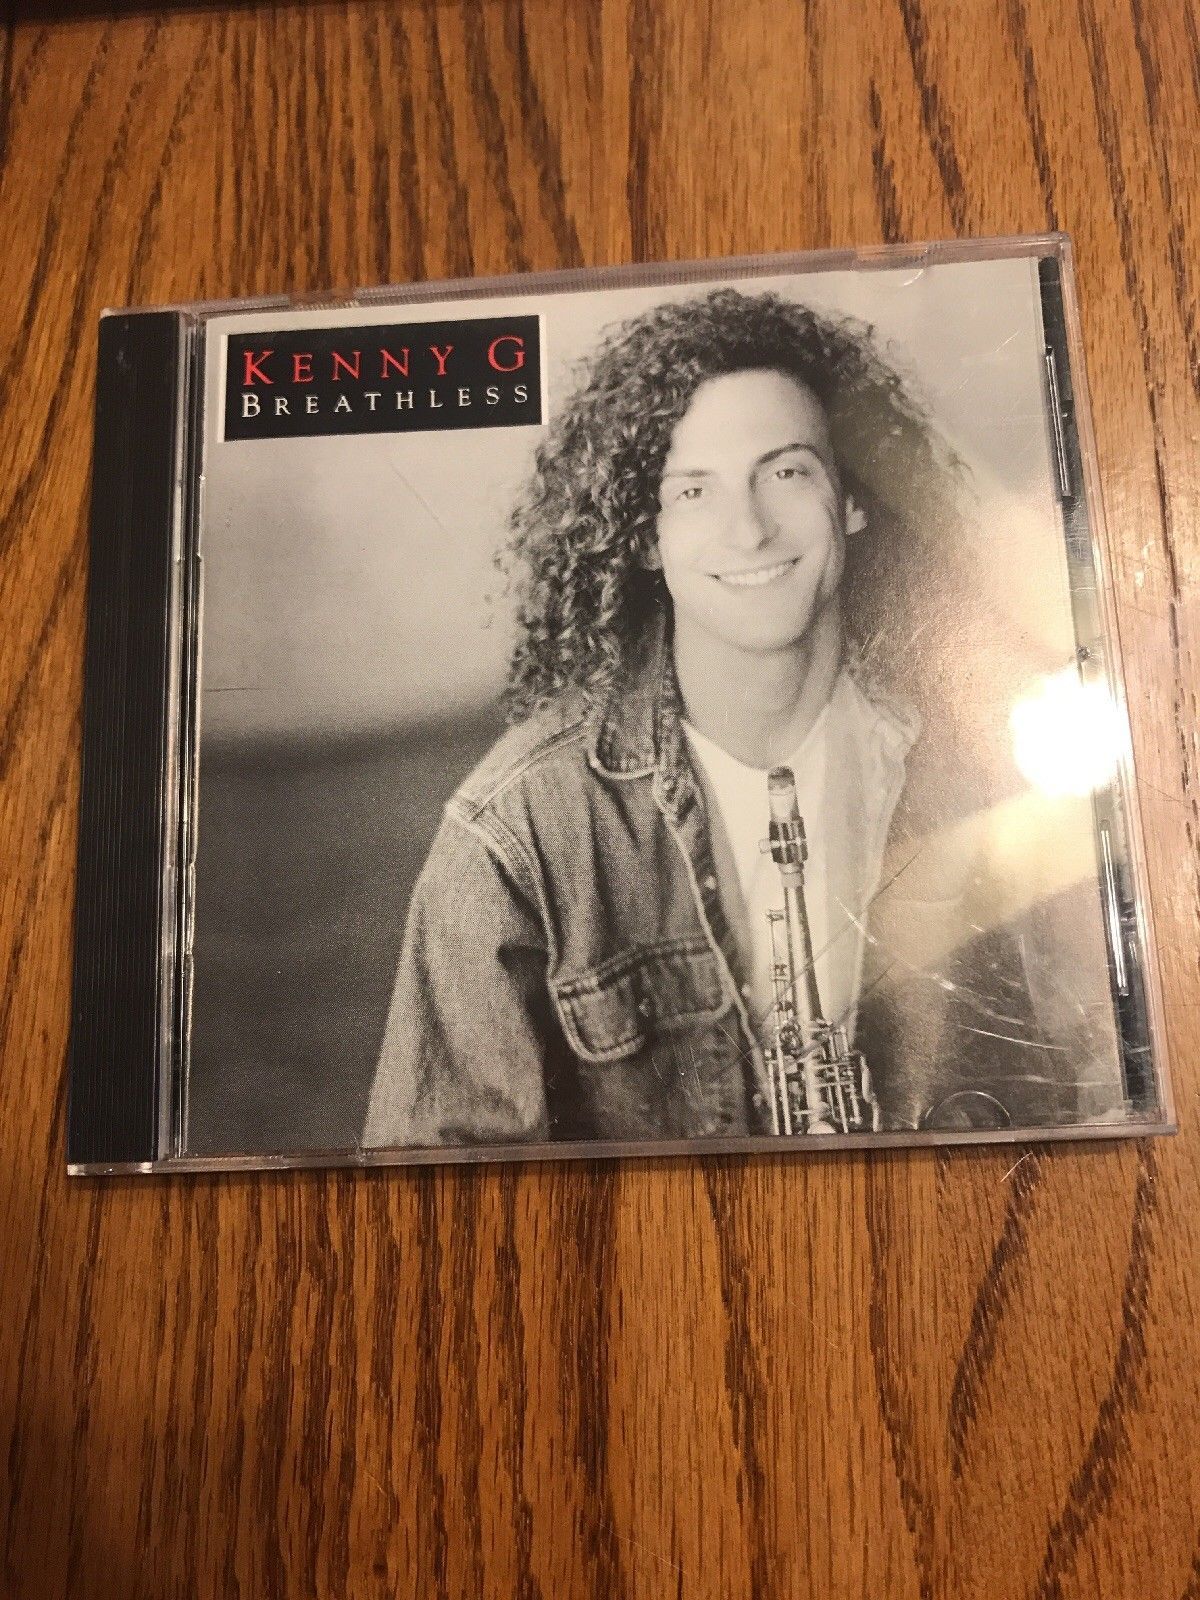 kenny g breathless free mp3 download